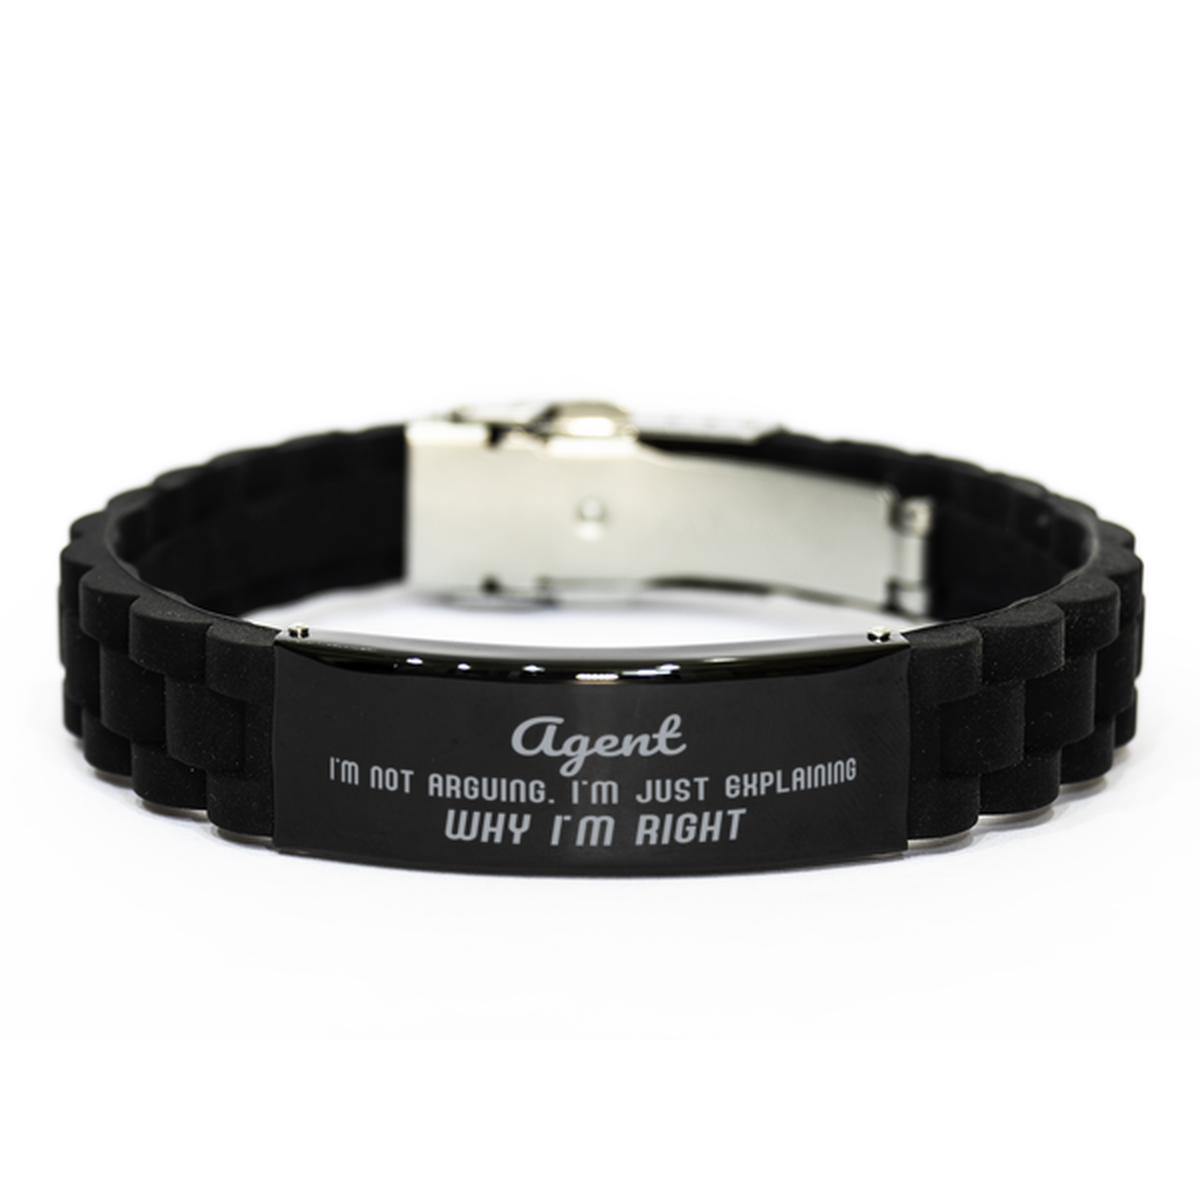 Agent I'm not Arguing. I'm Just Explaining Why I'm RIGHT Black Glidelock Clasp Bracelet, Funny Saying Quote Agent Gifts For Agent Graduation Birthday Christmas Gifts for Men Women Coworker